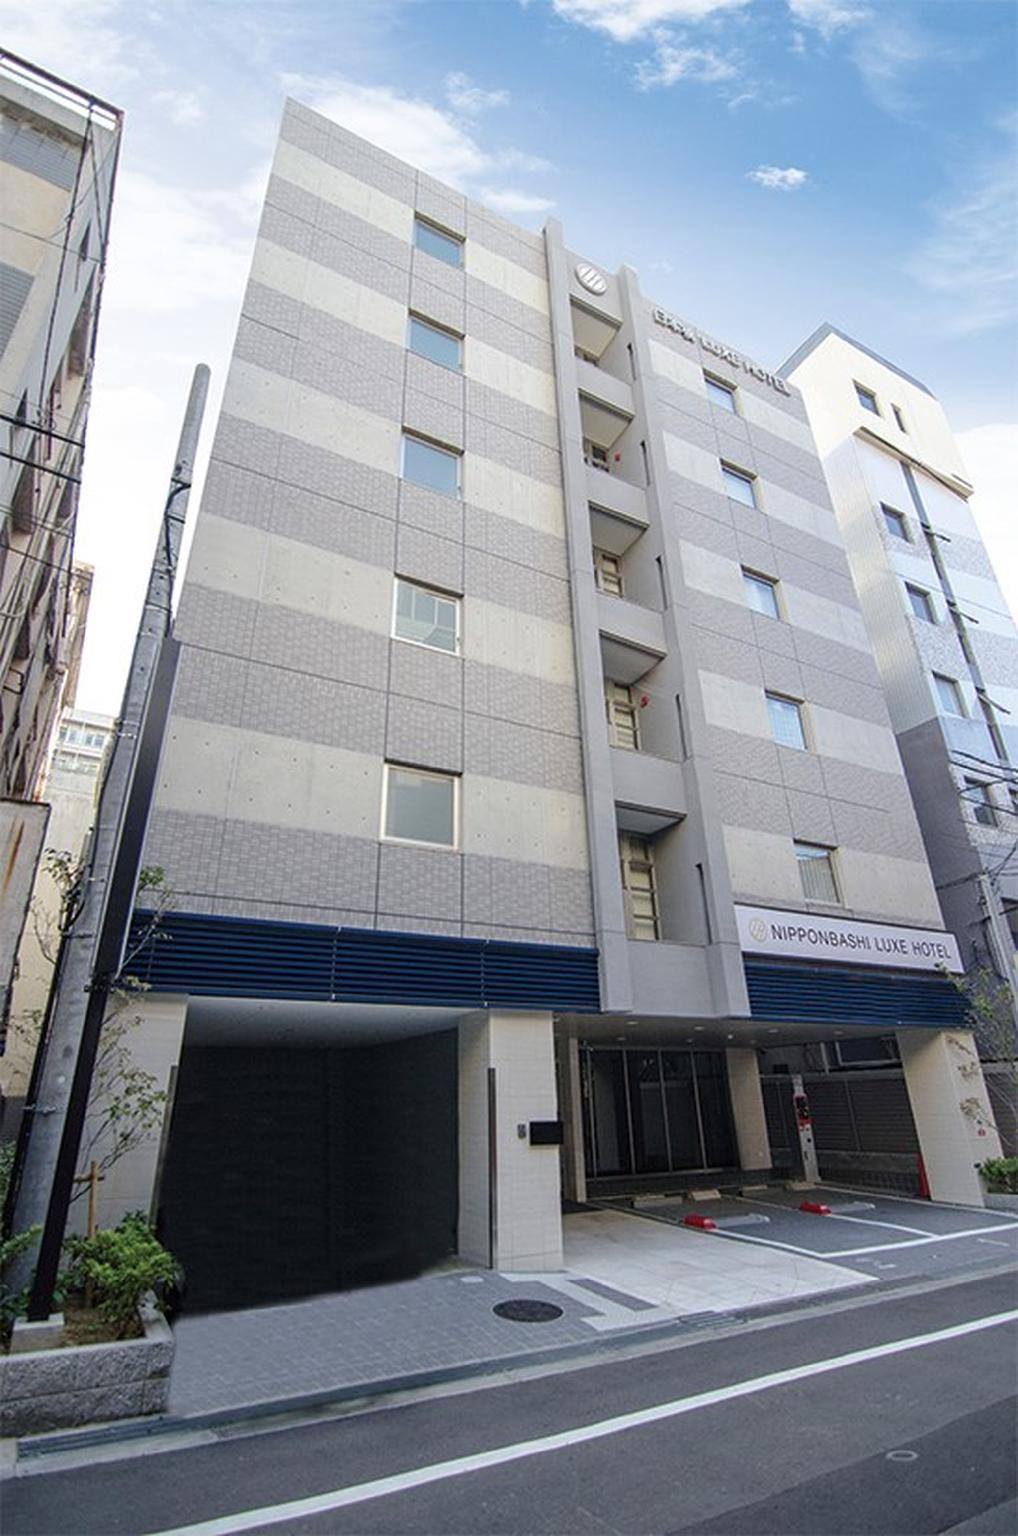 Nipponbashi Luxe Hotel image 1